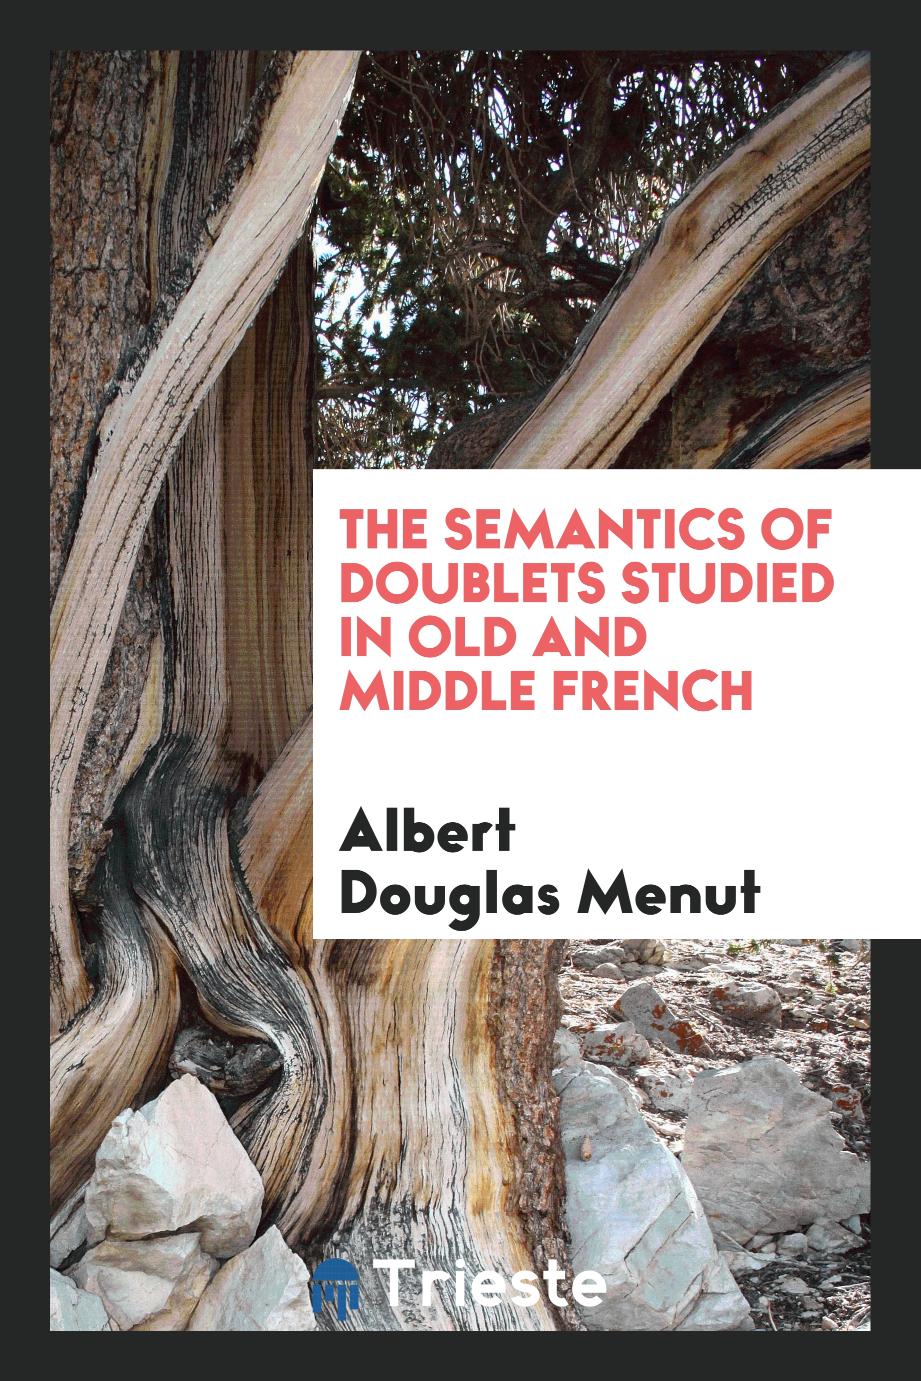 The Semantics of Doublets Studied in Old and Middle French